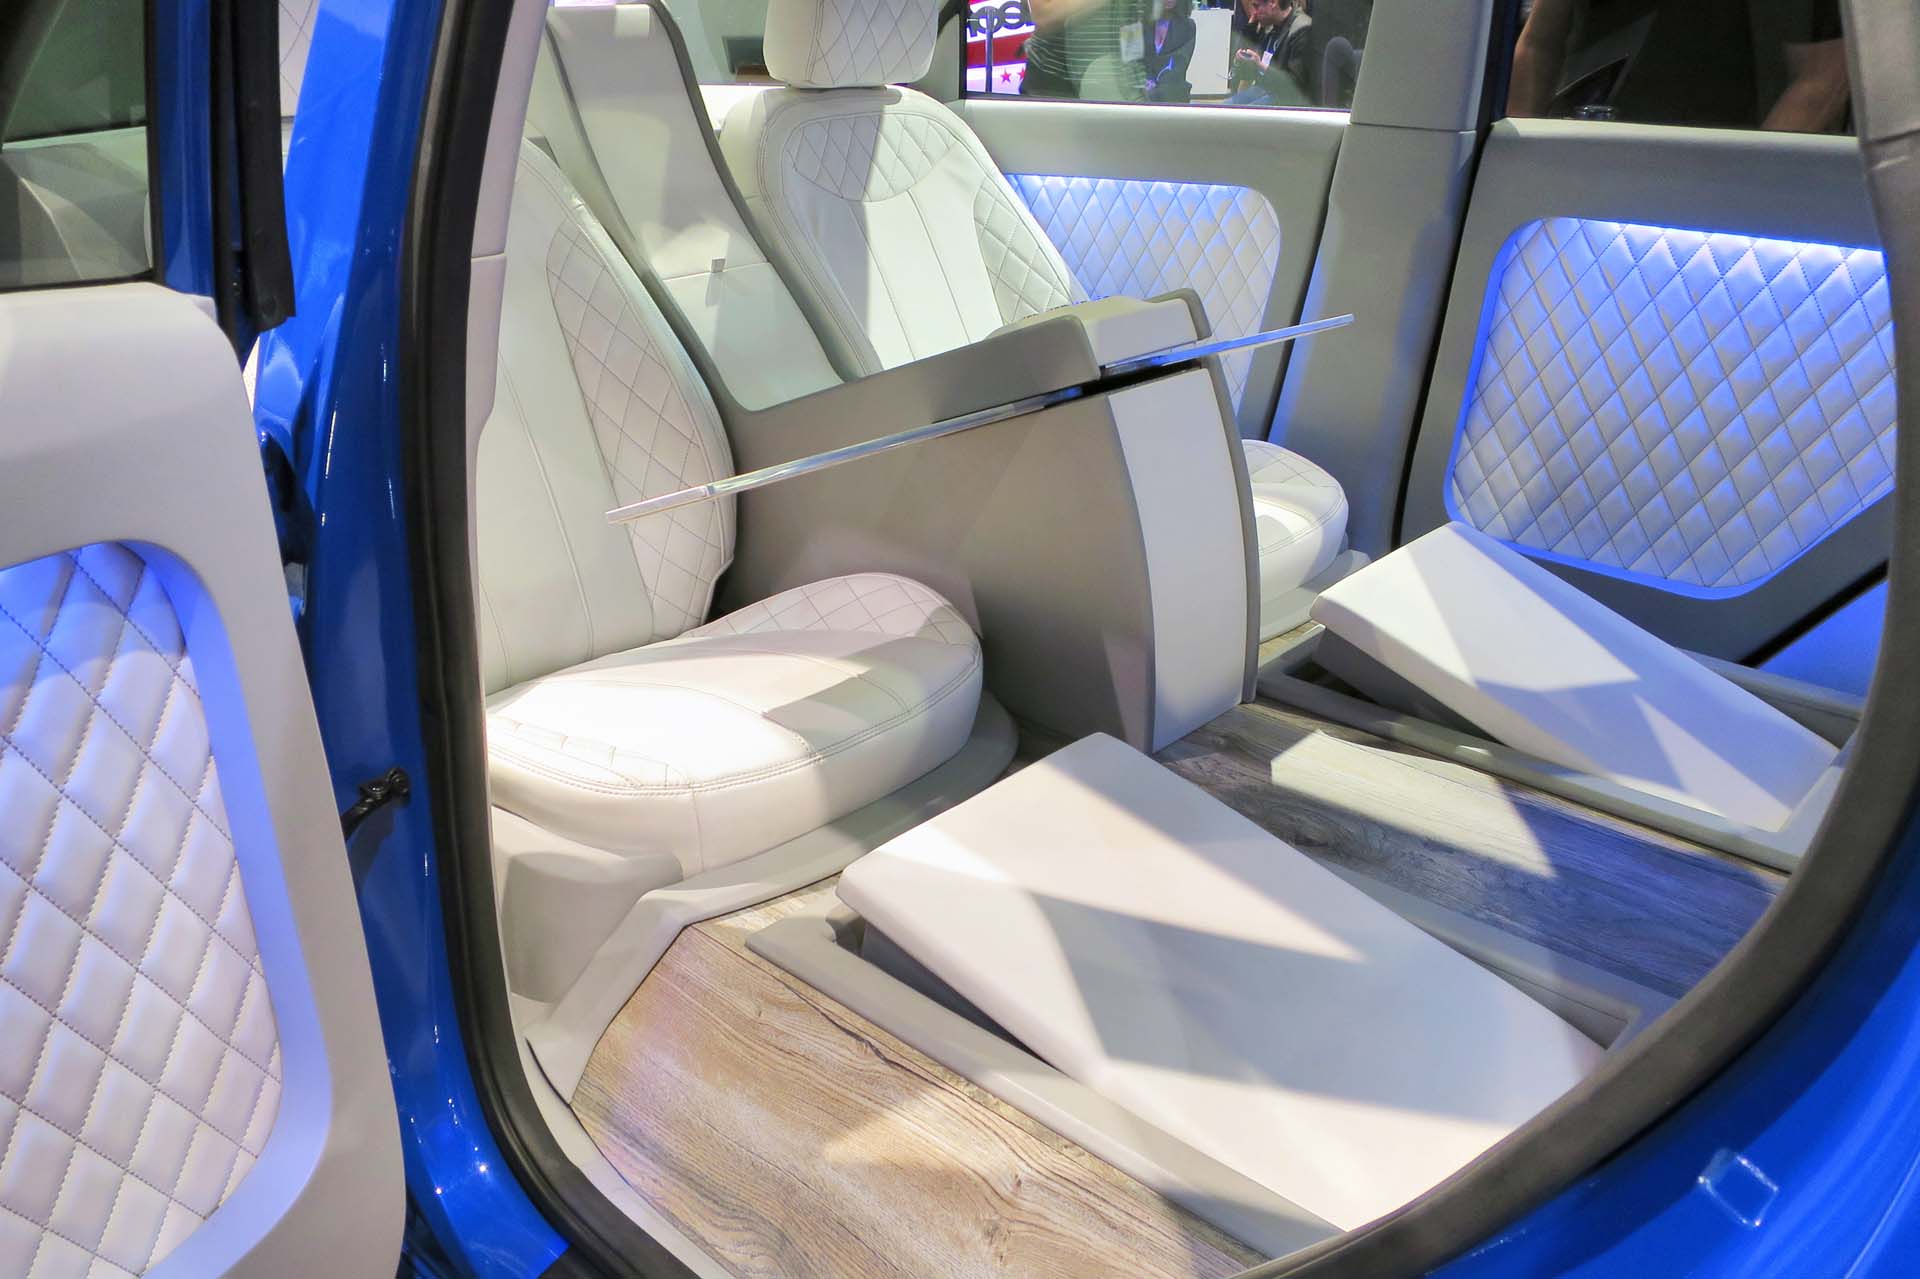 Kia explores autonomous driving with its “Soul First Class,” which has rear-facing seats and no steering wheel.